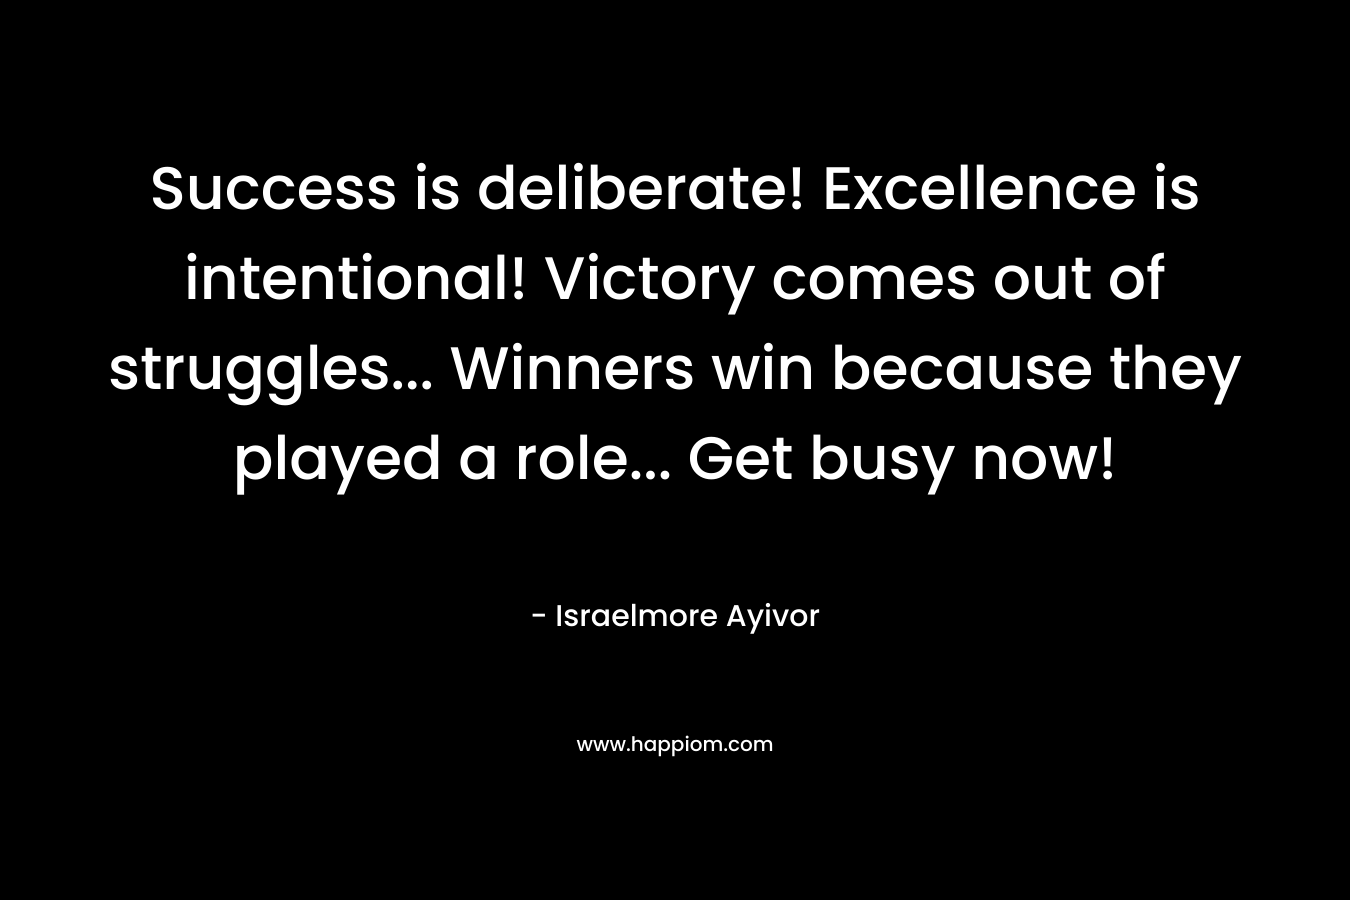 Success is deliberate! Excellence is intentional! Victory comes out of struggles… Winners win because they played a role… Get busy now! – Israelmore Ayivor